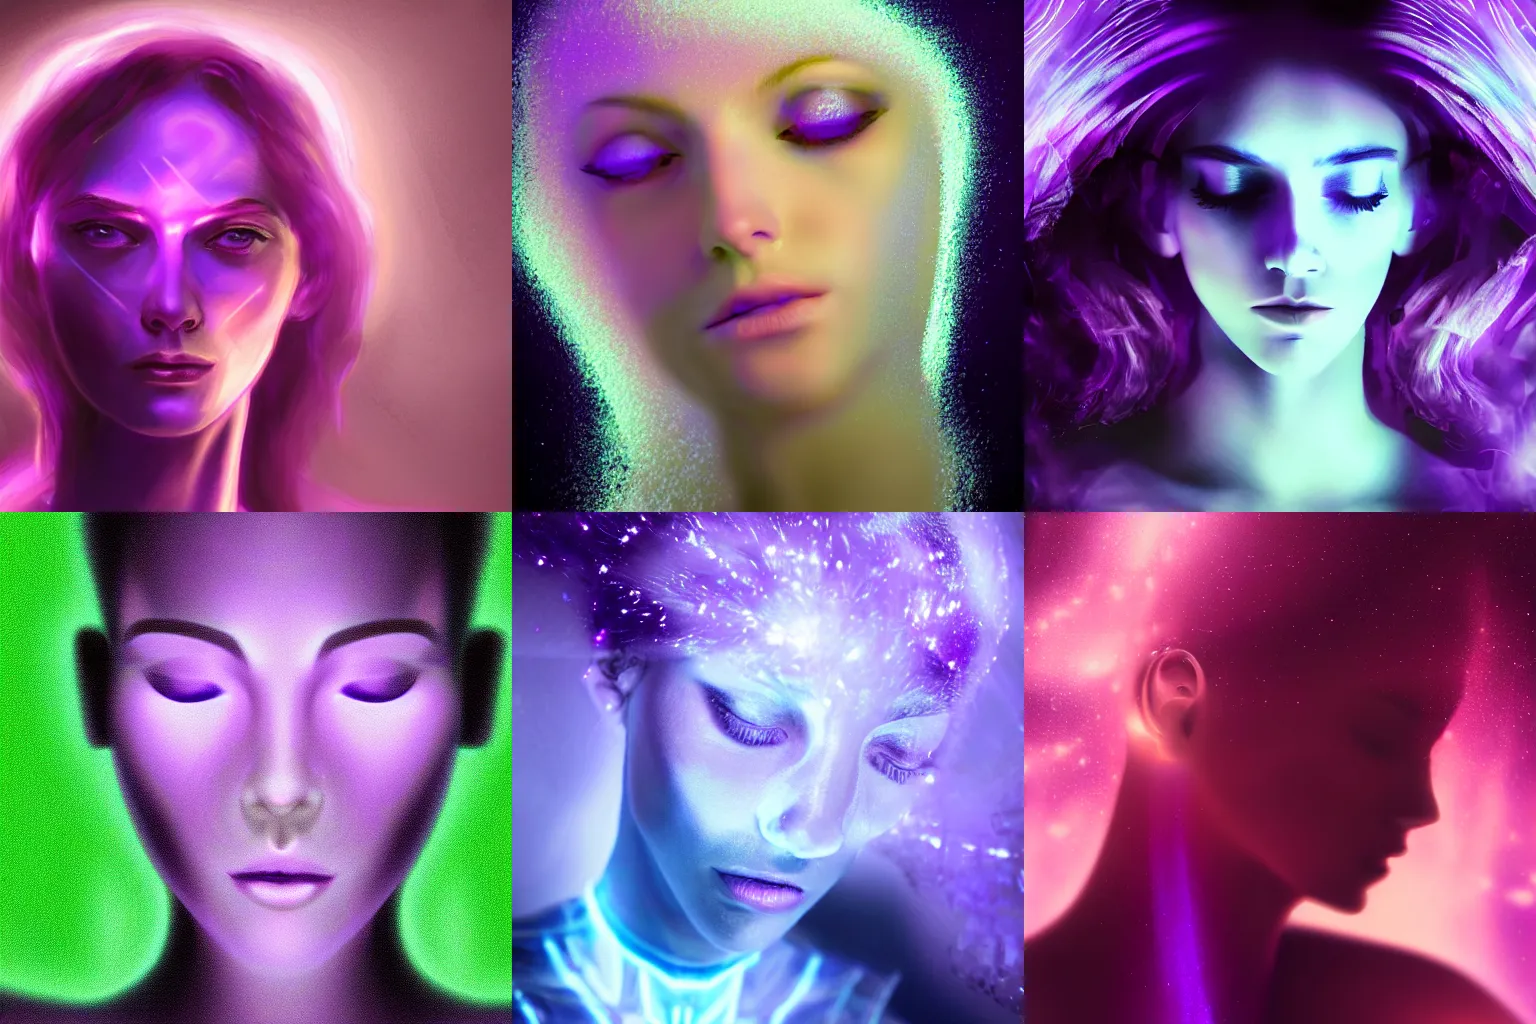 Prompt: closeup portrait of an ethereal person made of purple light, divine, cyberspace, mysterious, concept art